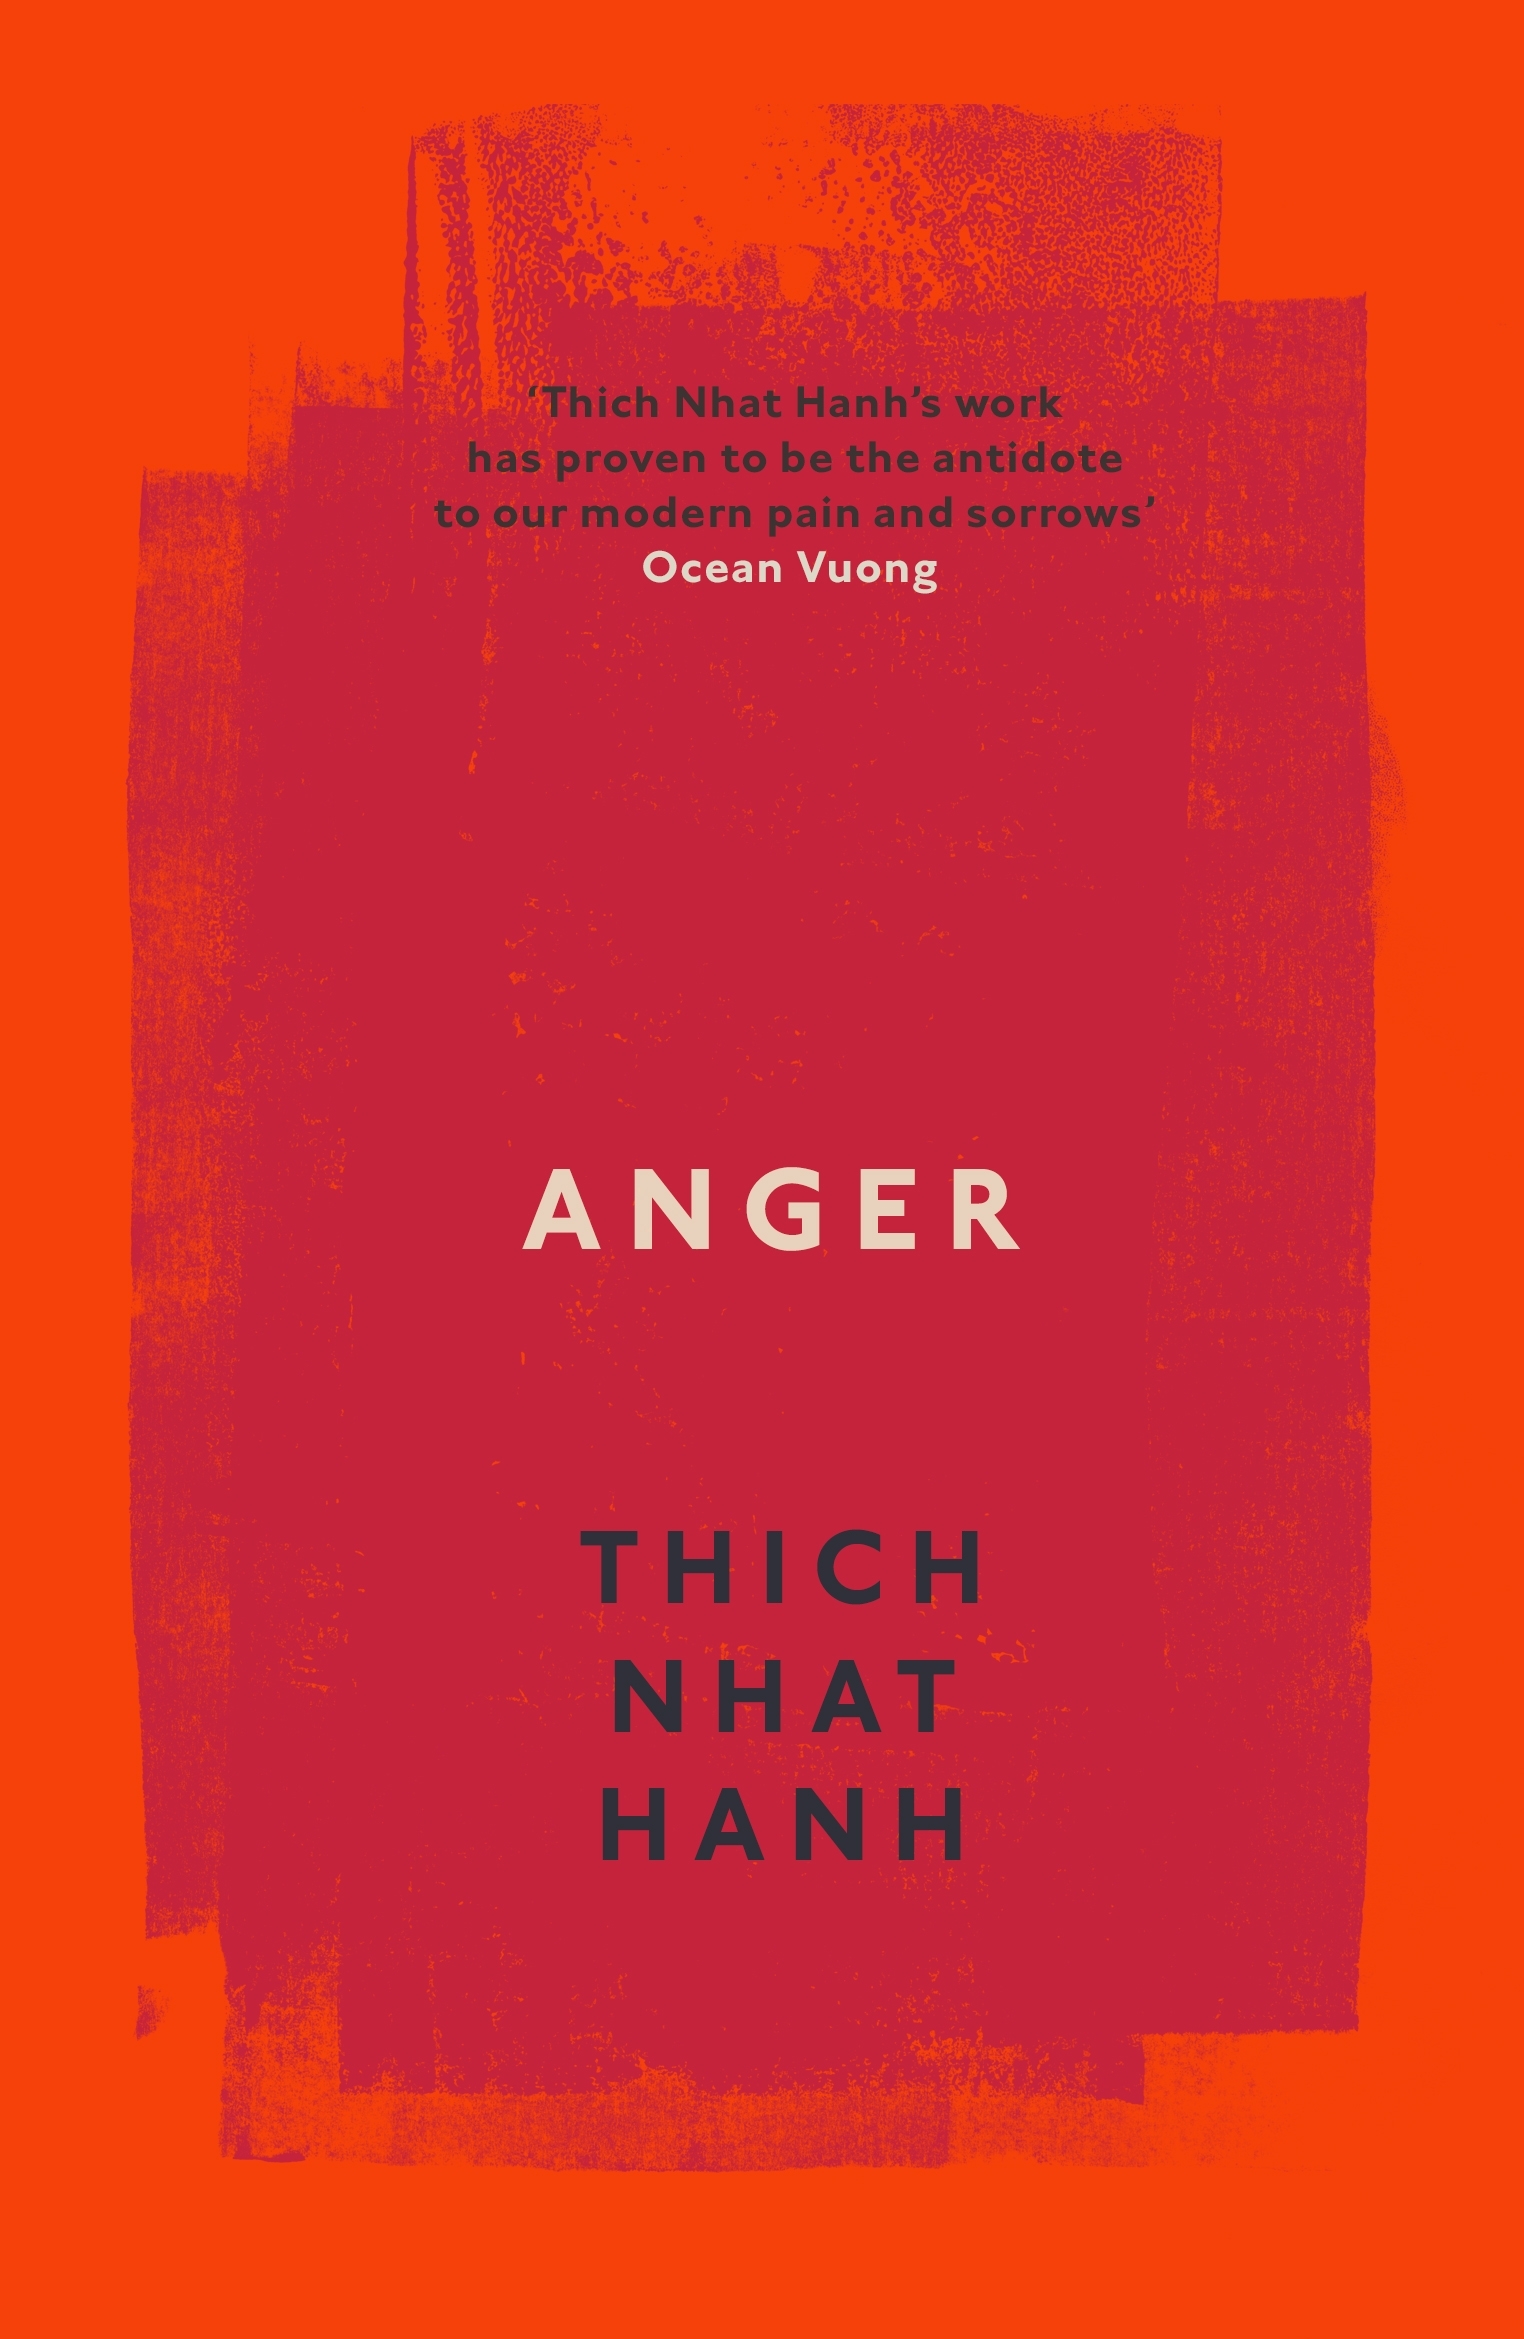 Anger by Thich Nhat Hanh - Penguin Books New Zealand